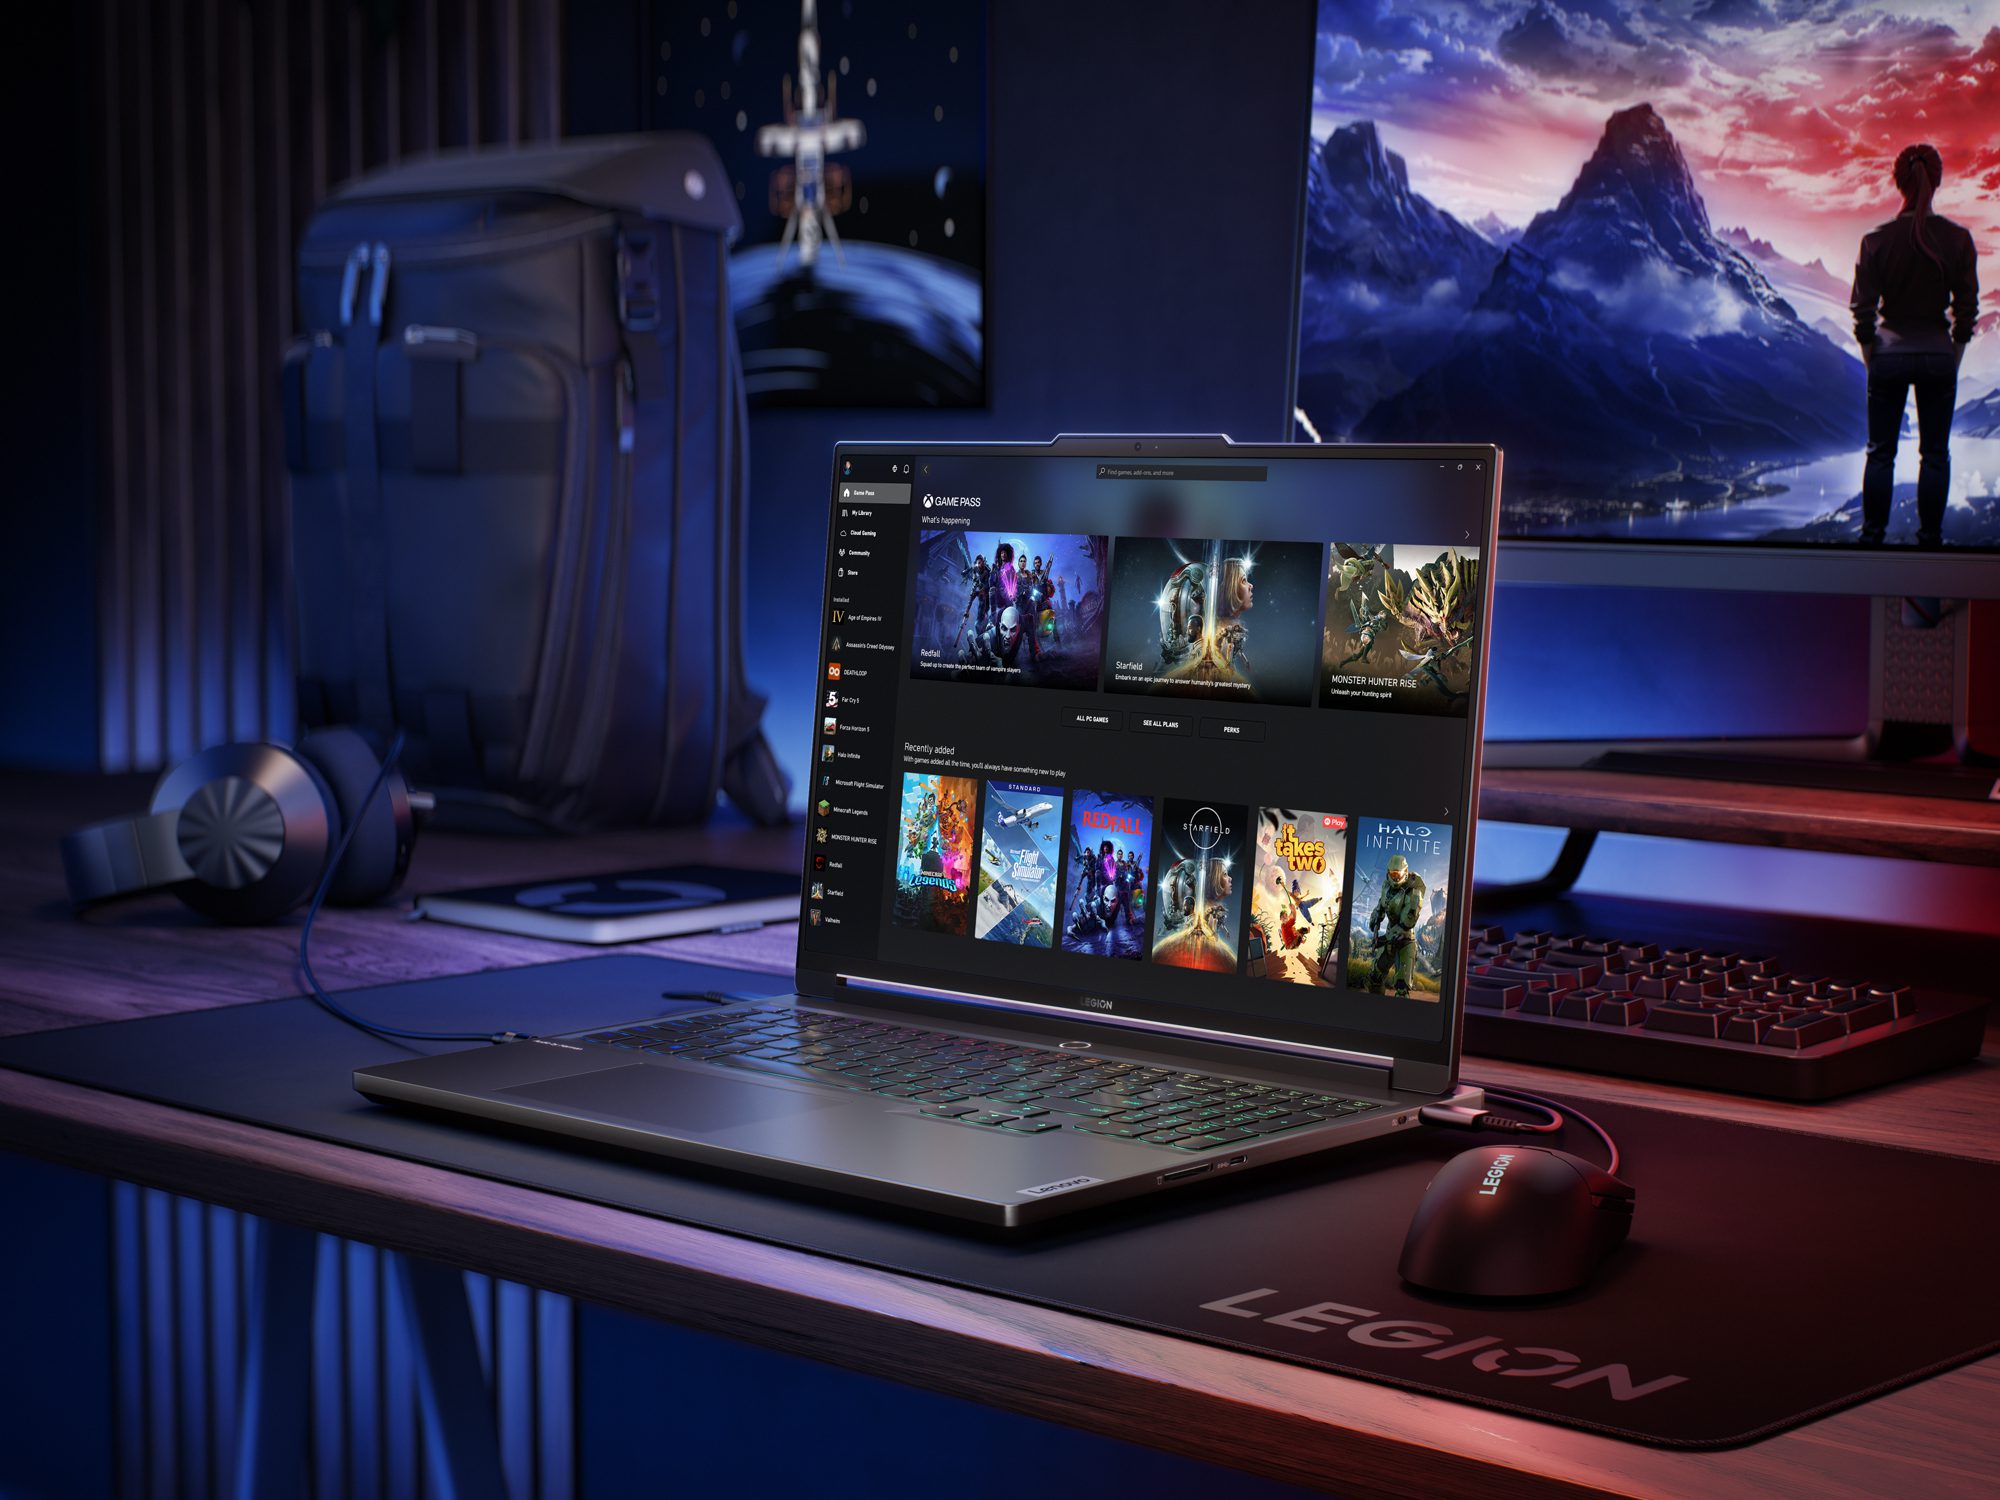 Lenovo Legion 9i (Gen 8) is the most impressive gaming laptop to date